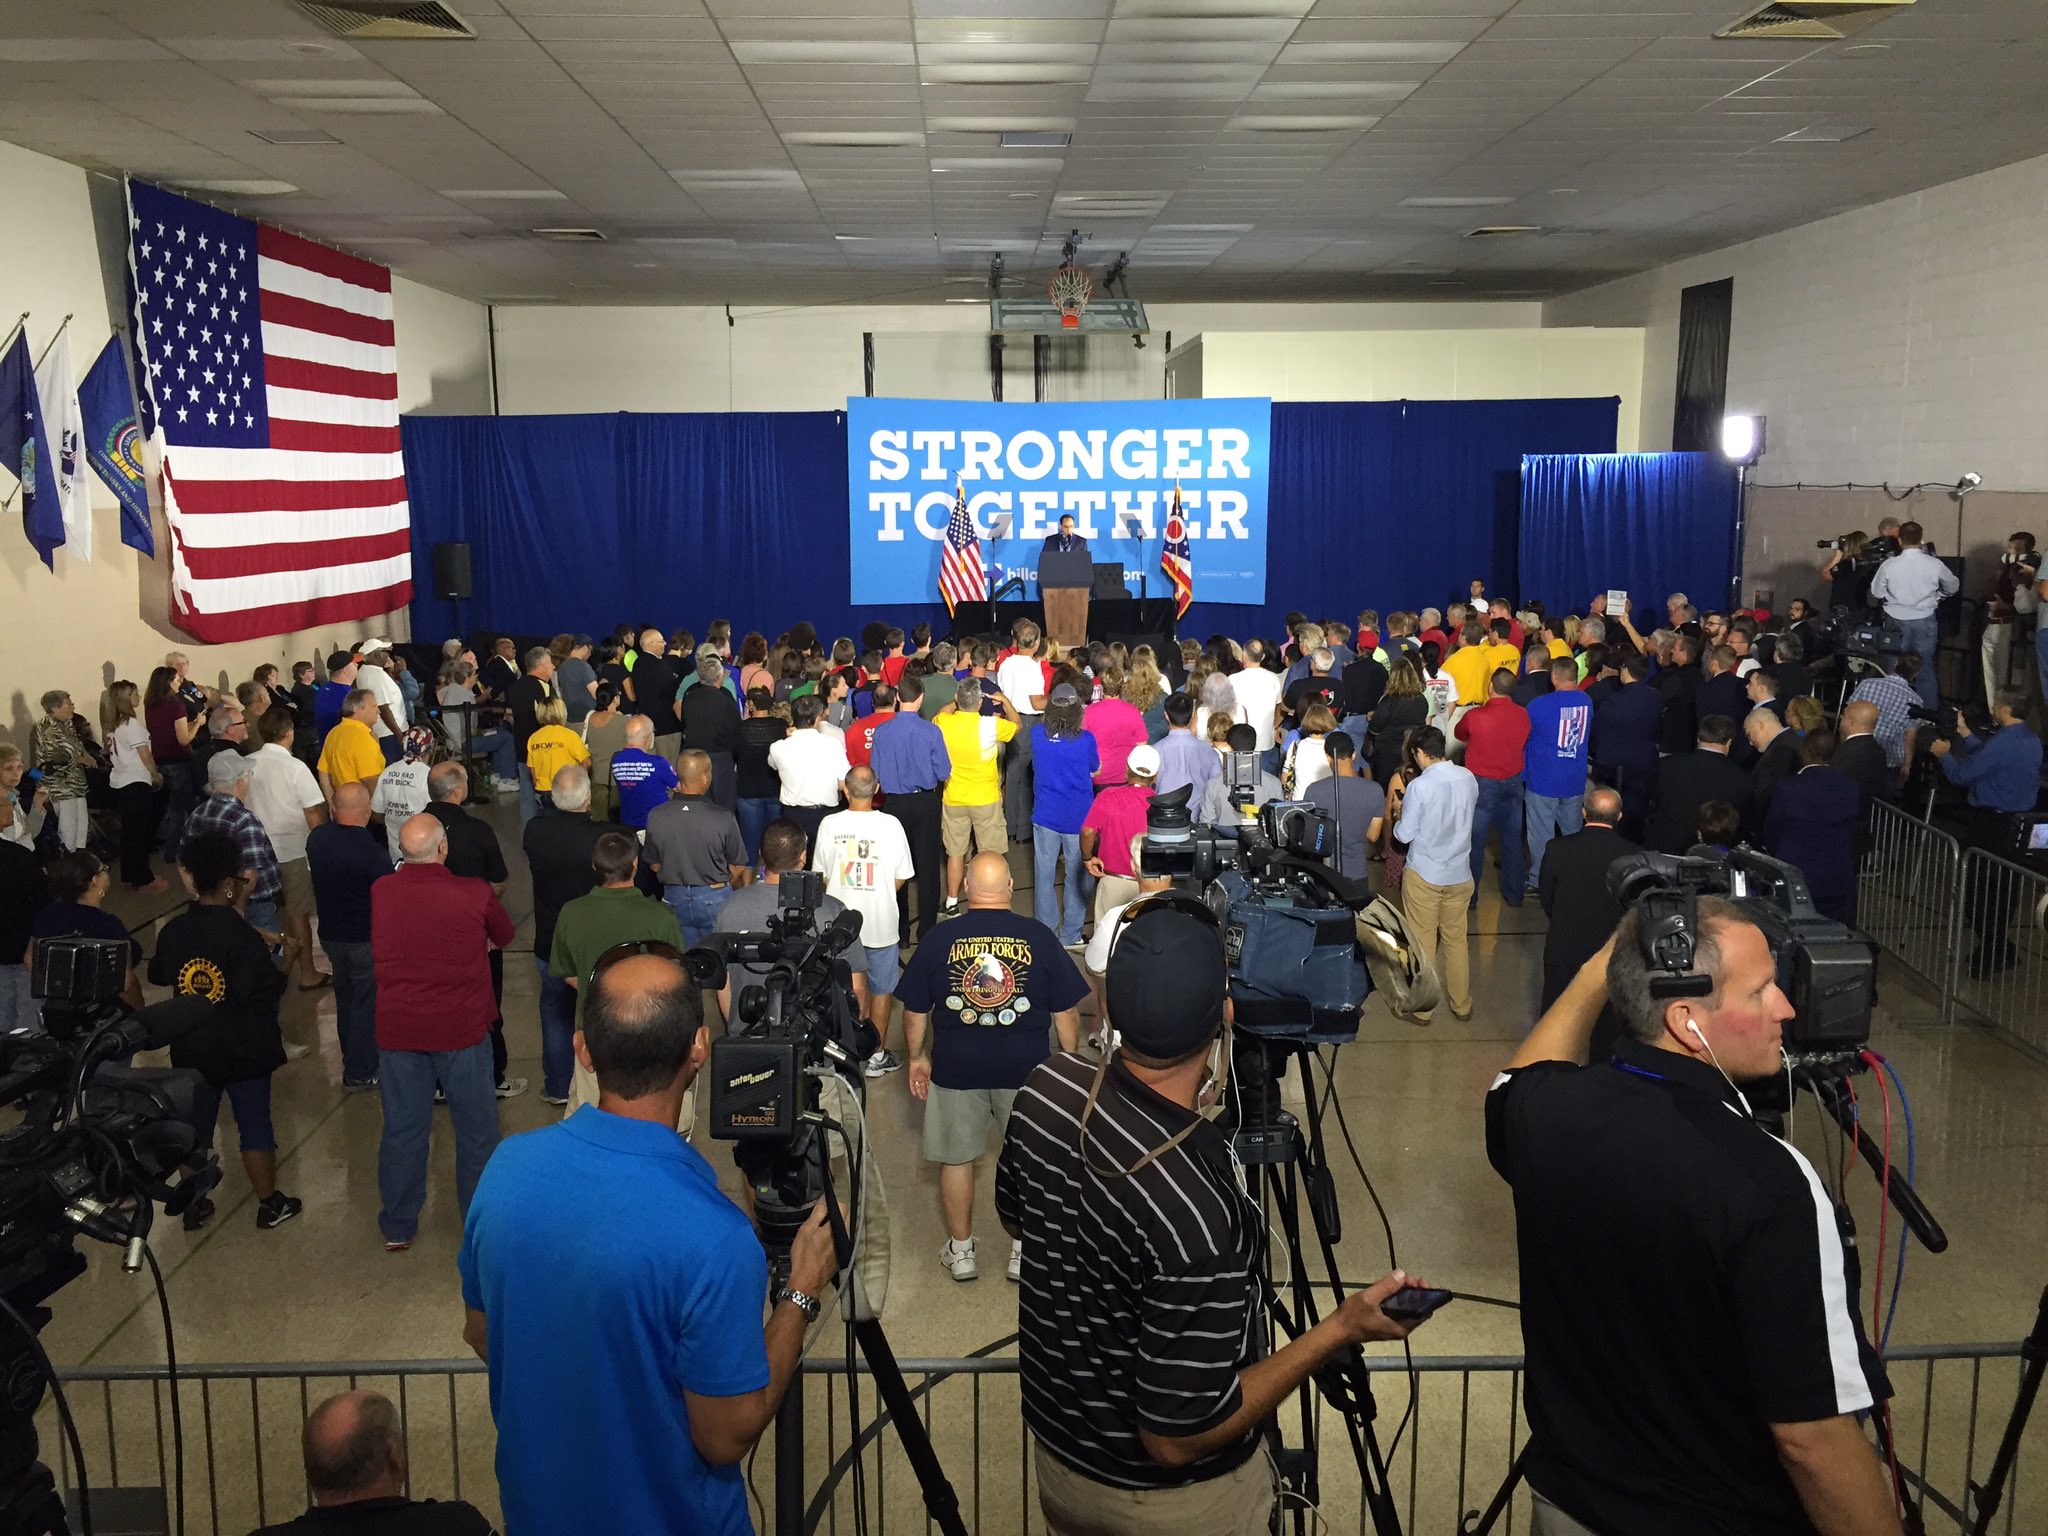 DOWN: Only 200 unionists turn out to see Biden campaign for Hillary in Ohio - The ...2048 x 1536